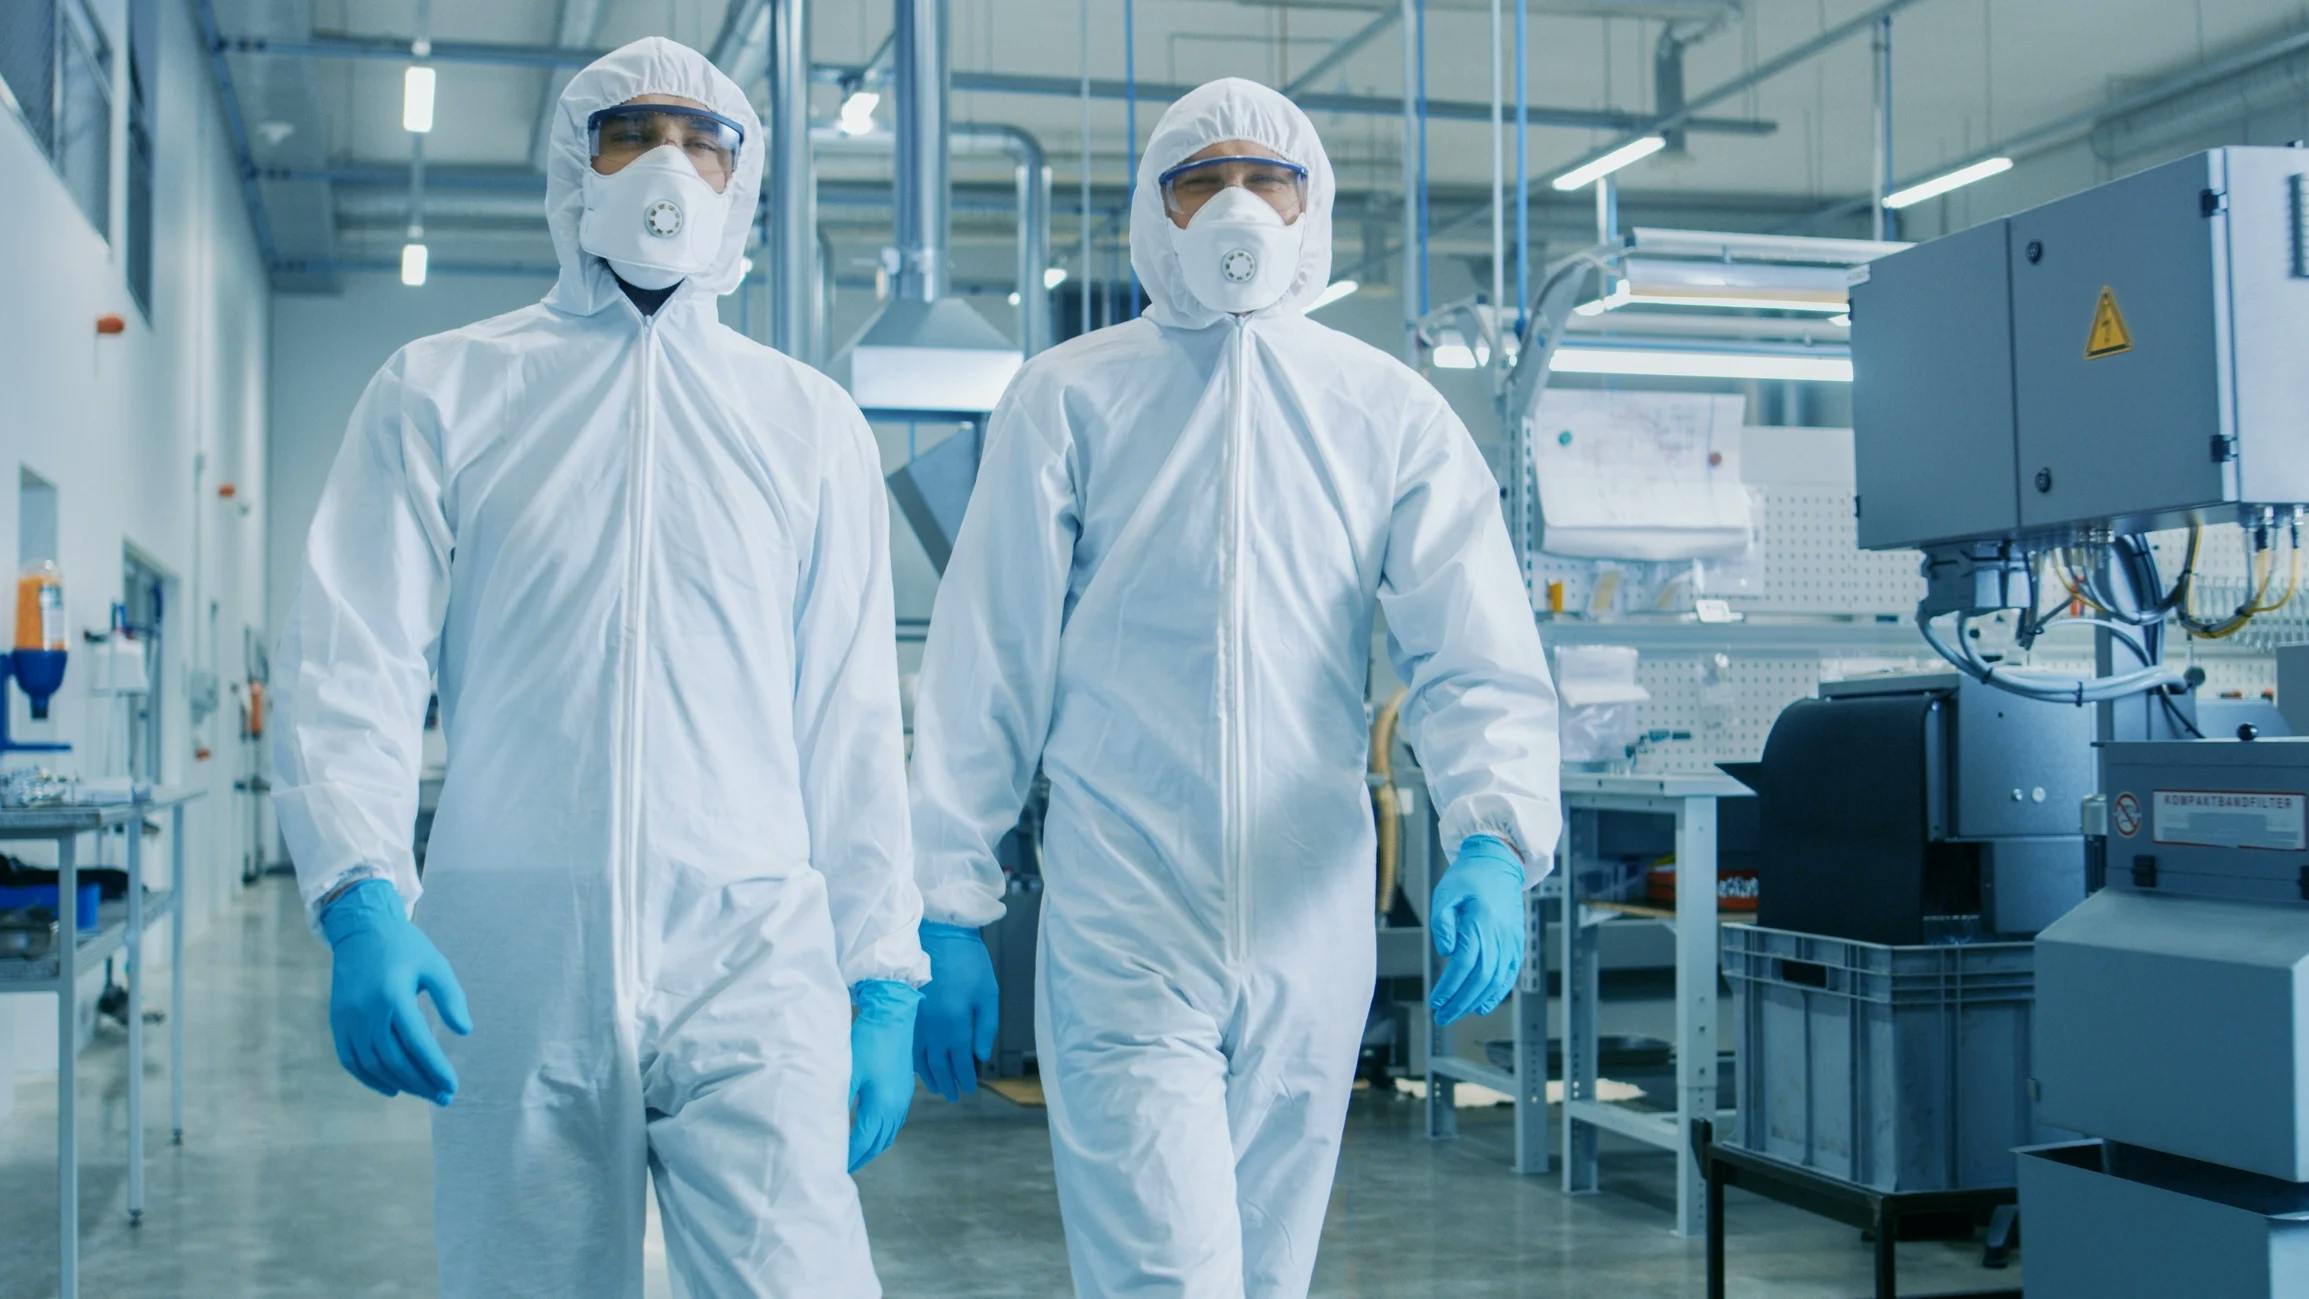 Contamination Control in Cleanrooms: Key Elements